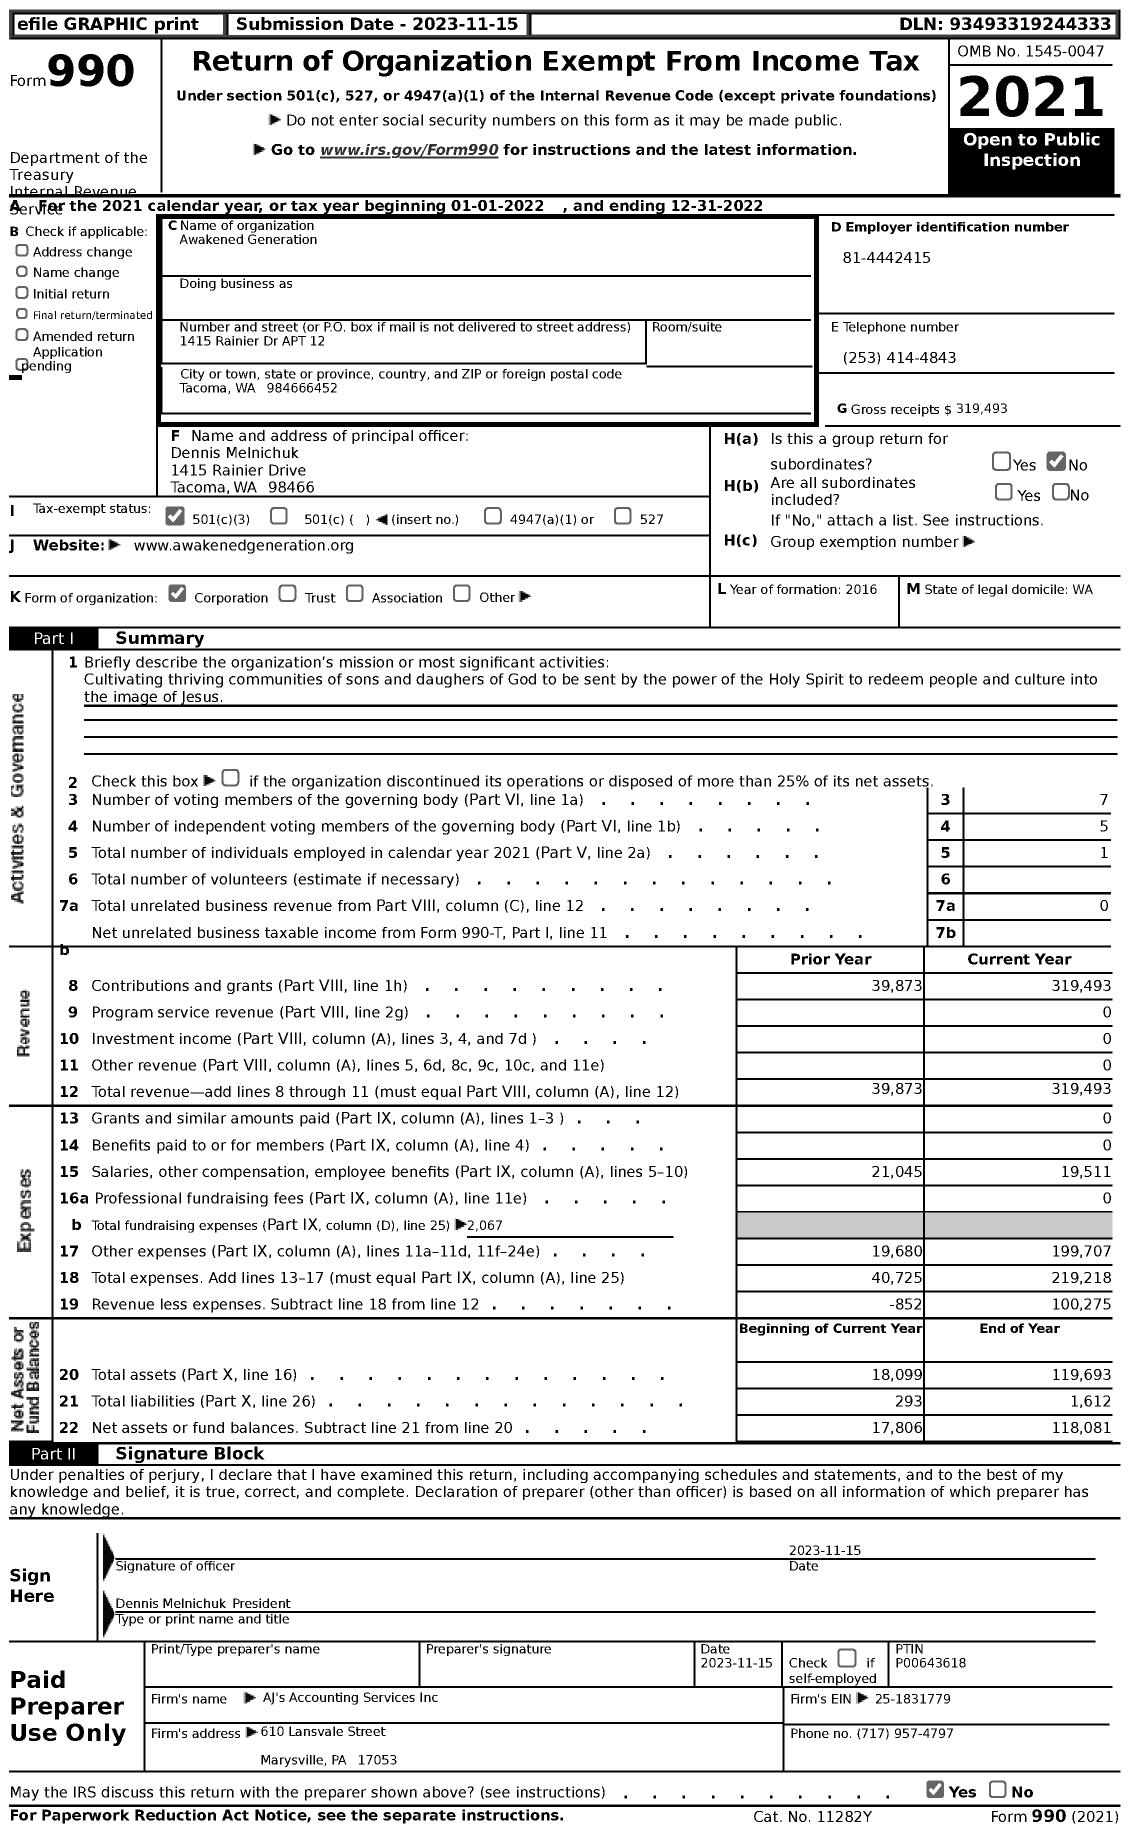 Image of first page of 2022 Form 990 for Awakened Generation